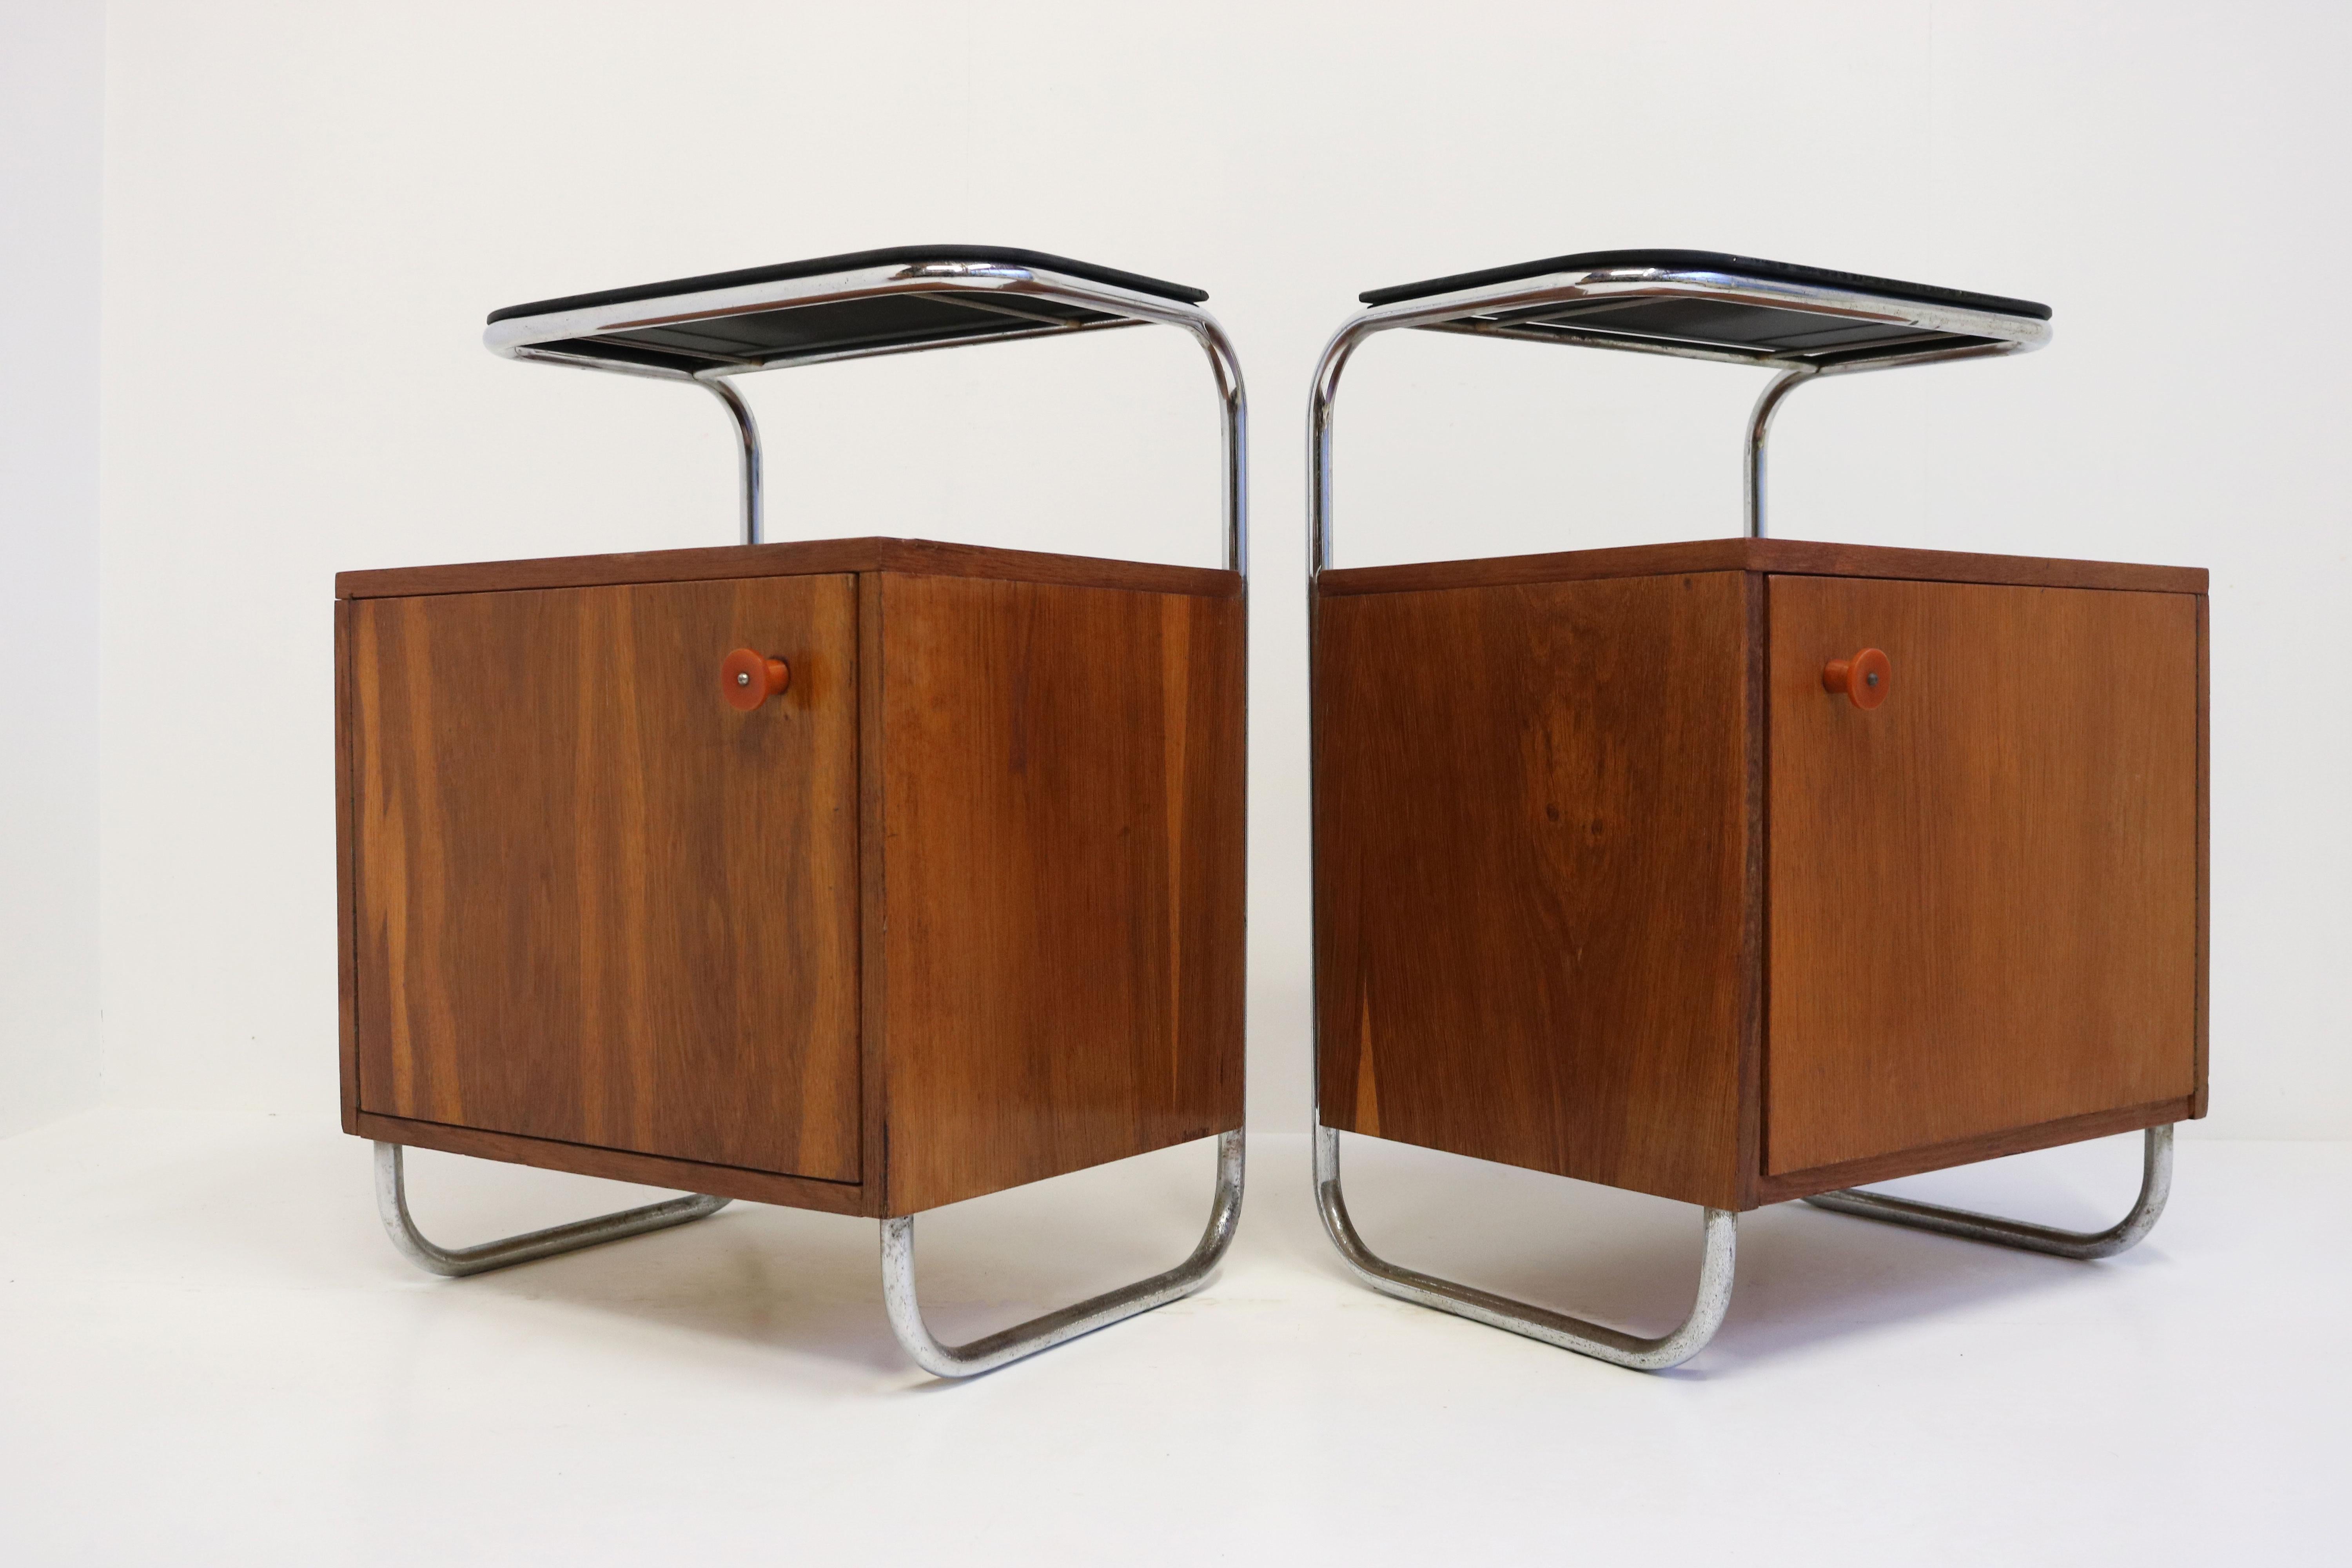 Hand-Crafted Pair of Art Deco Bauhaus Bedside Tables / Nightstands 1930 Chrome Black Glass 